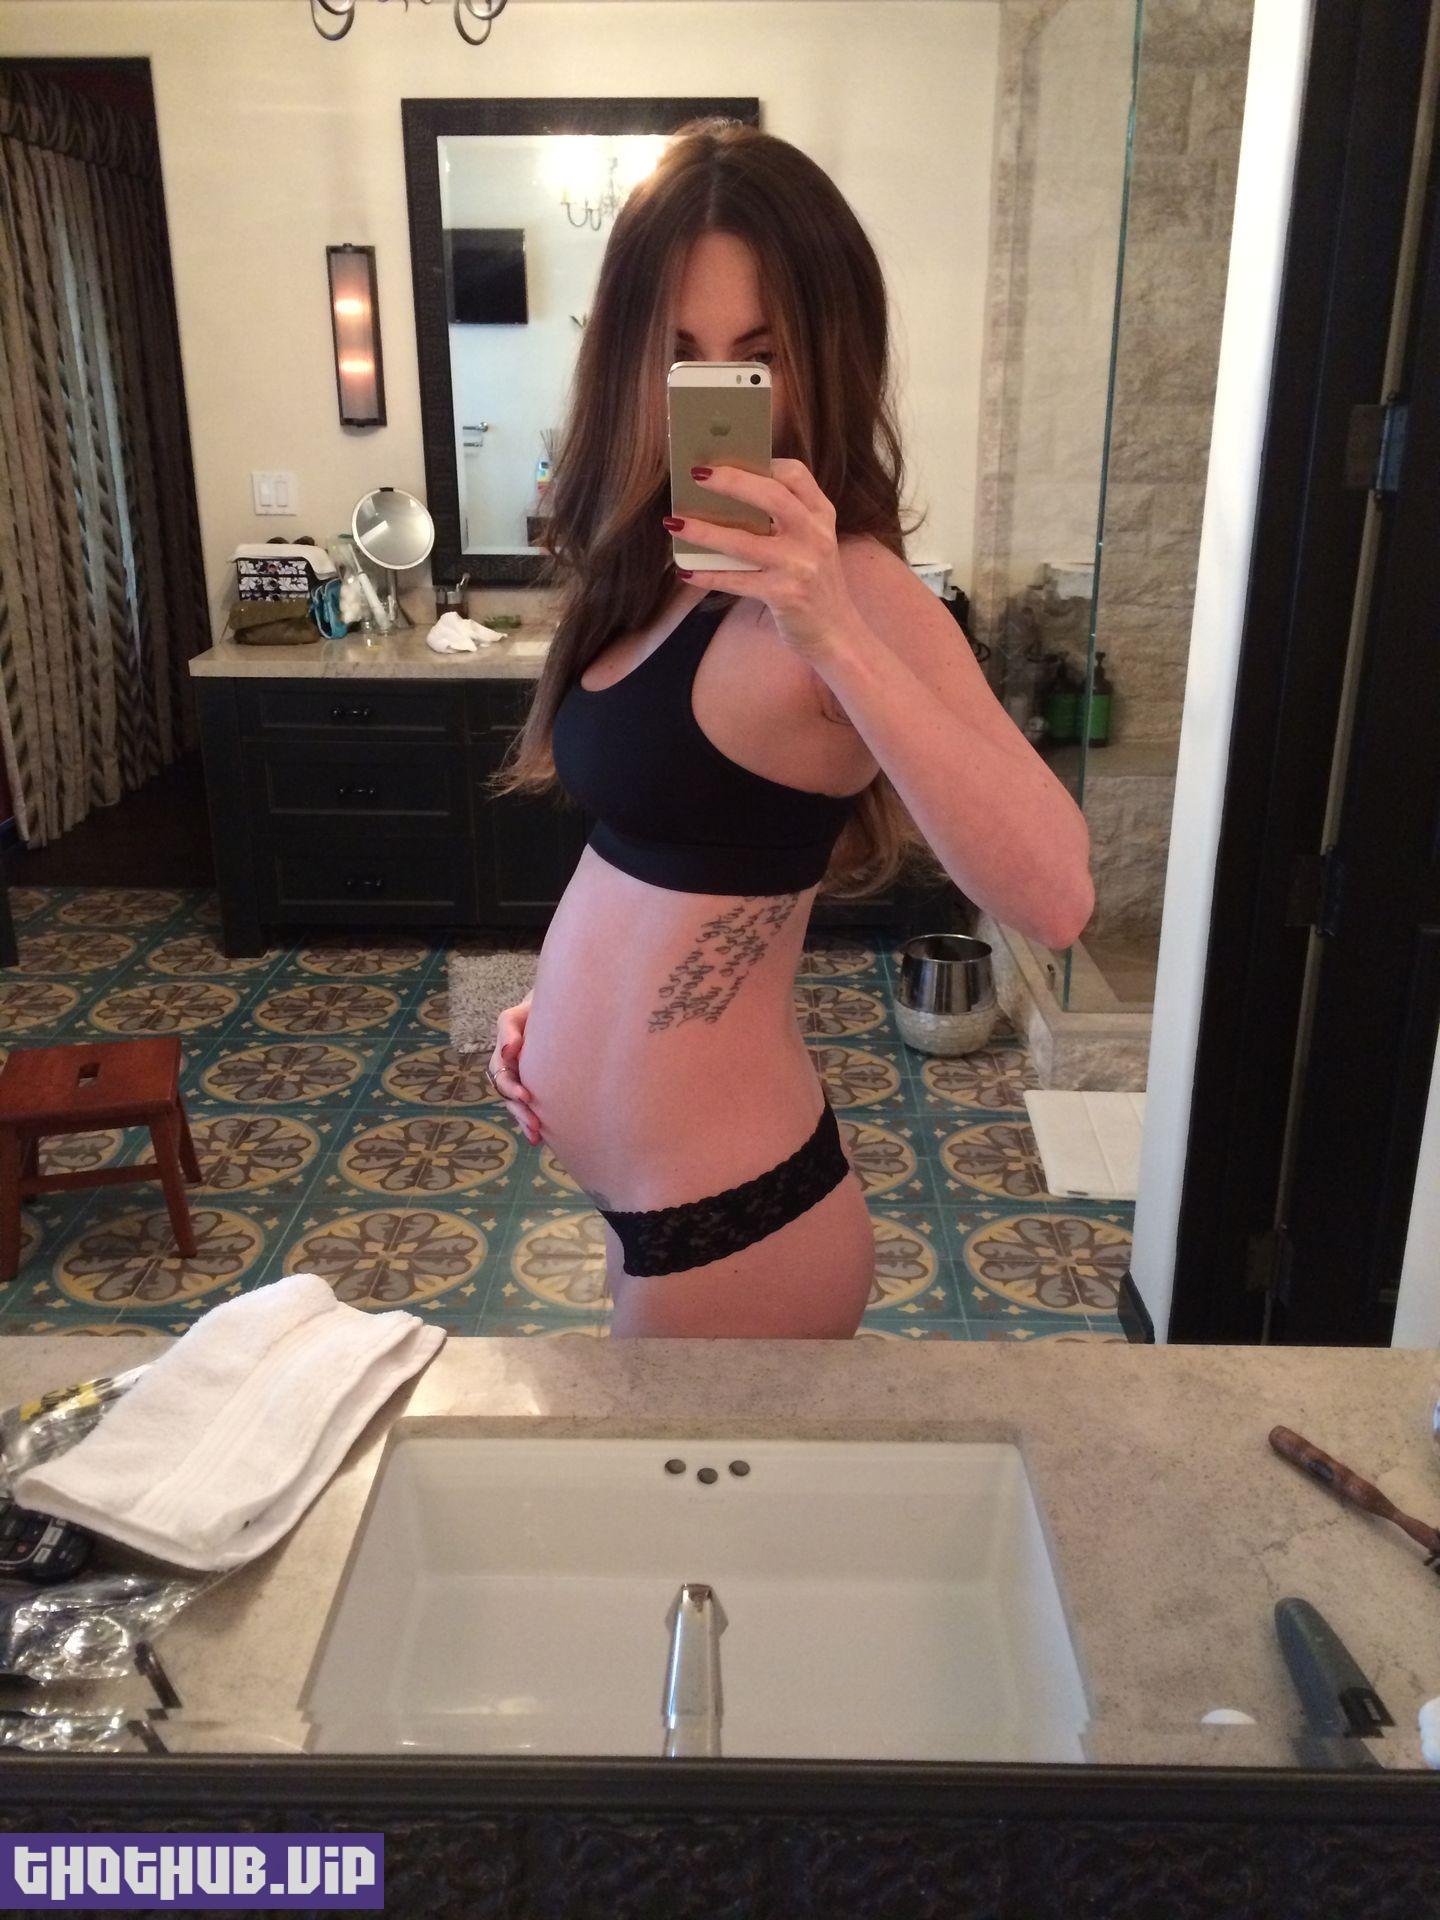 Megan Fox nude pregnant photos leaked The Fappening